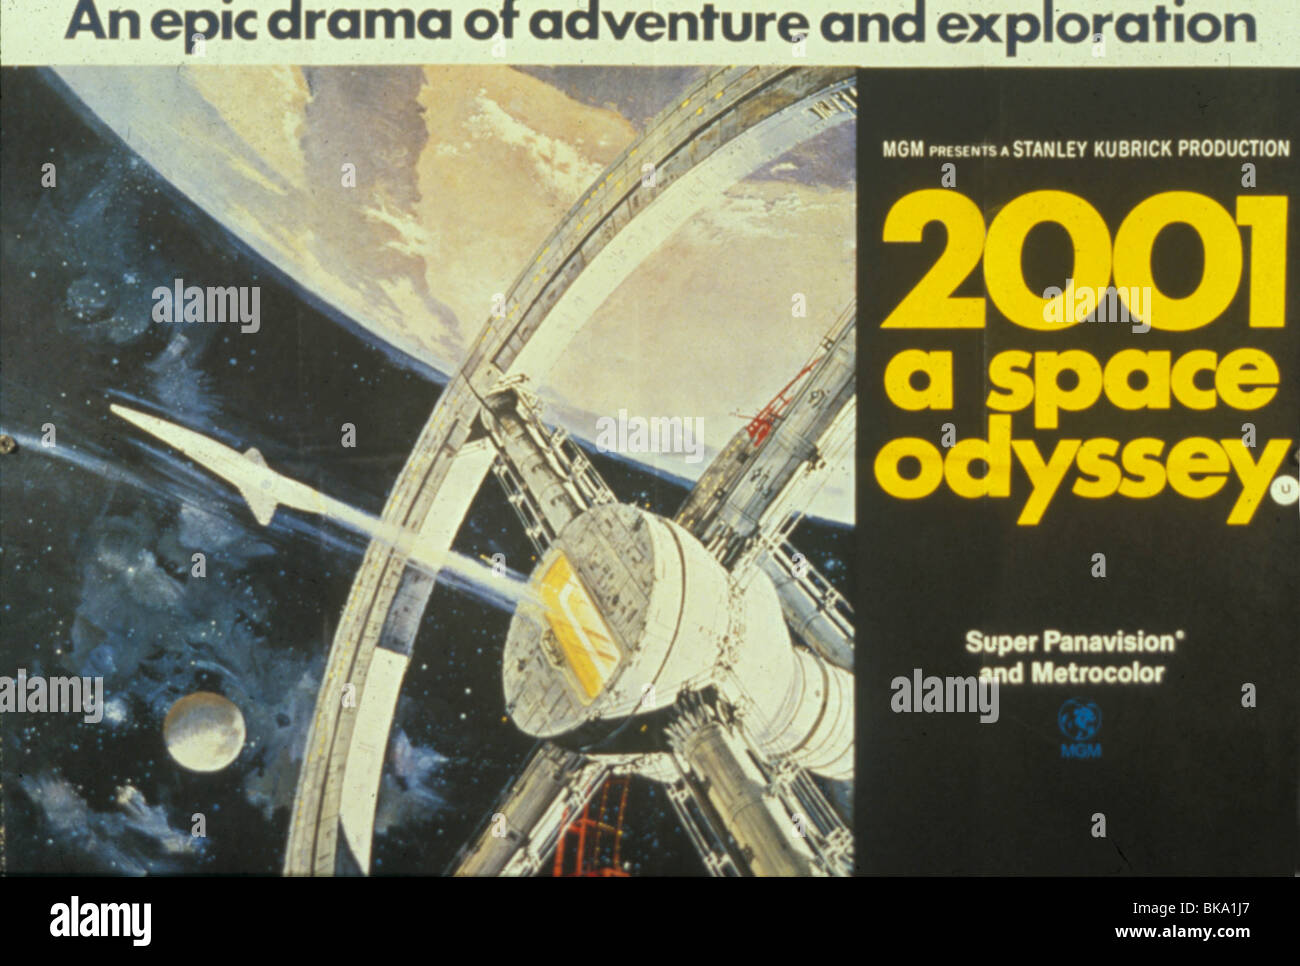 2001: A SPACE ODYSSEY (1968) POSTER TTO 049 Stock Photo